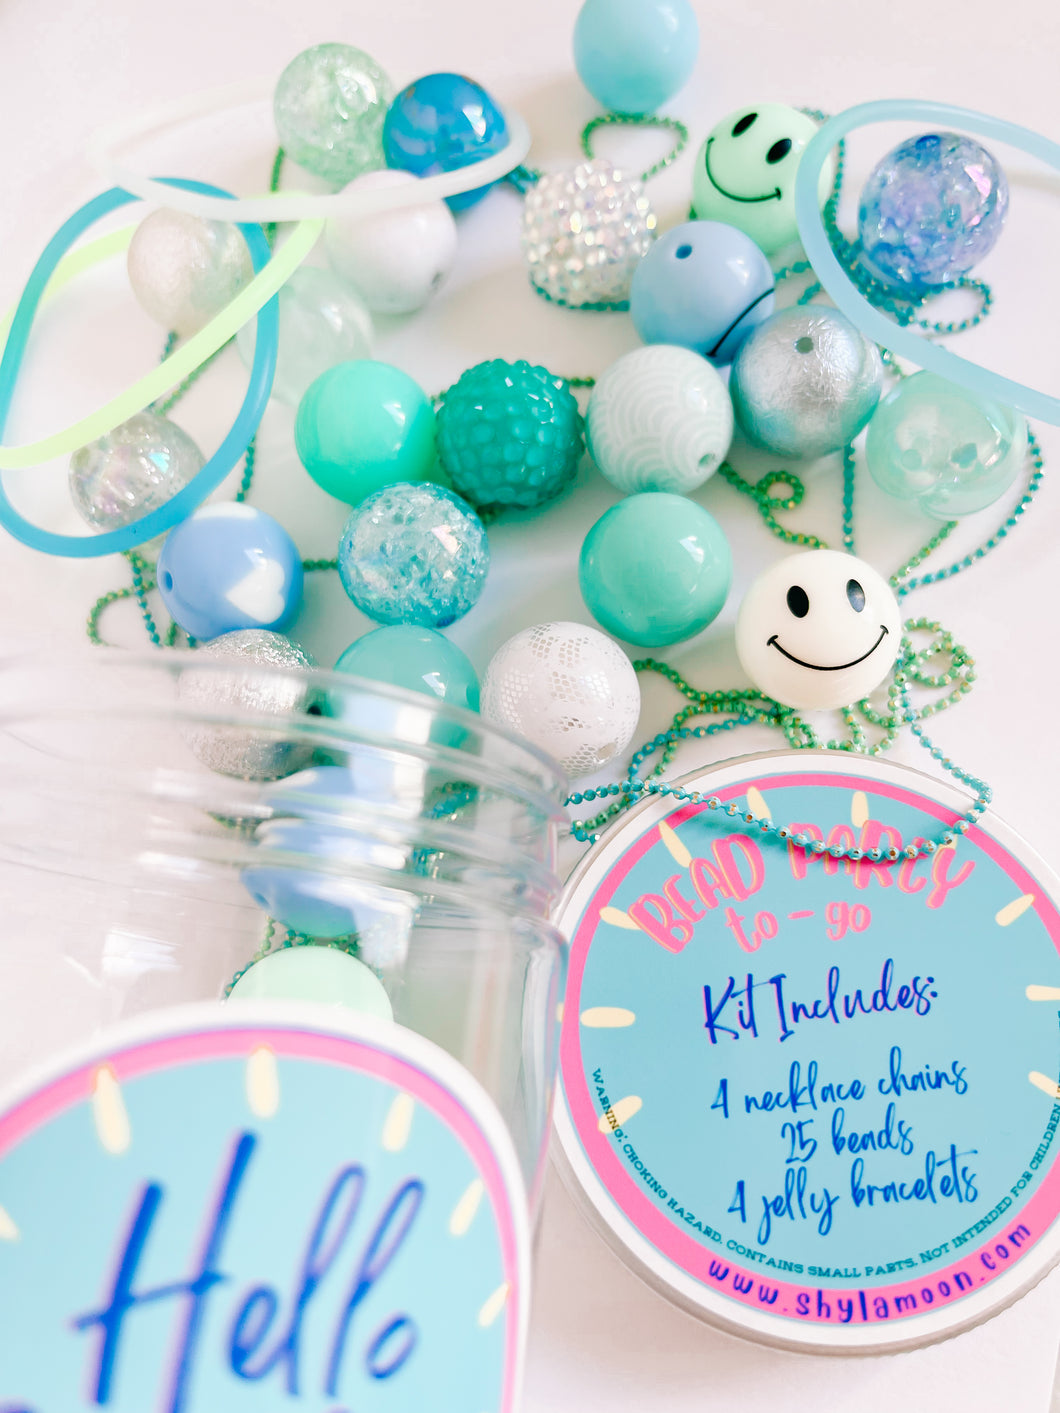 Bead Party To-Go Kit in 'The Sky's The Limit' with Jelly Bracelets